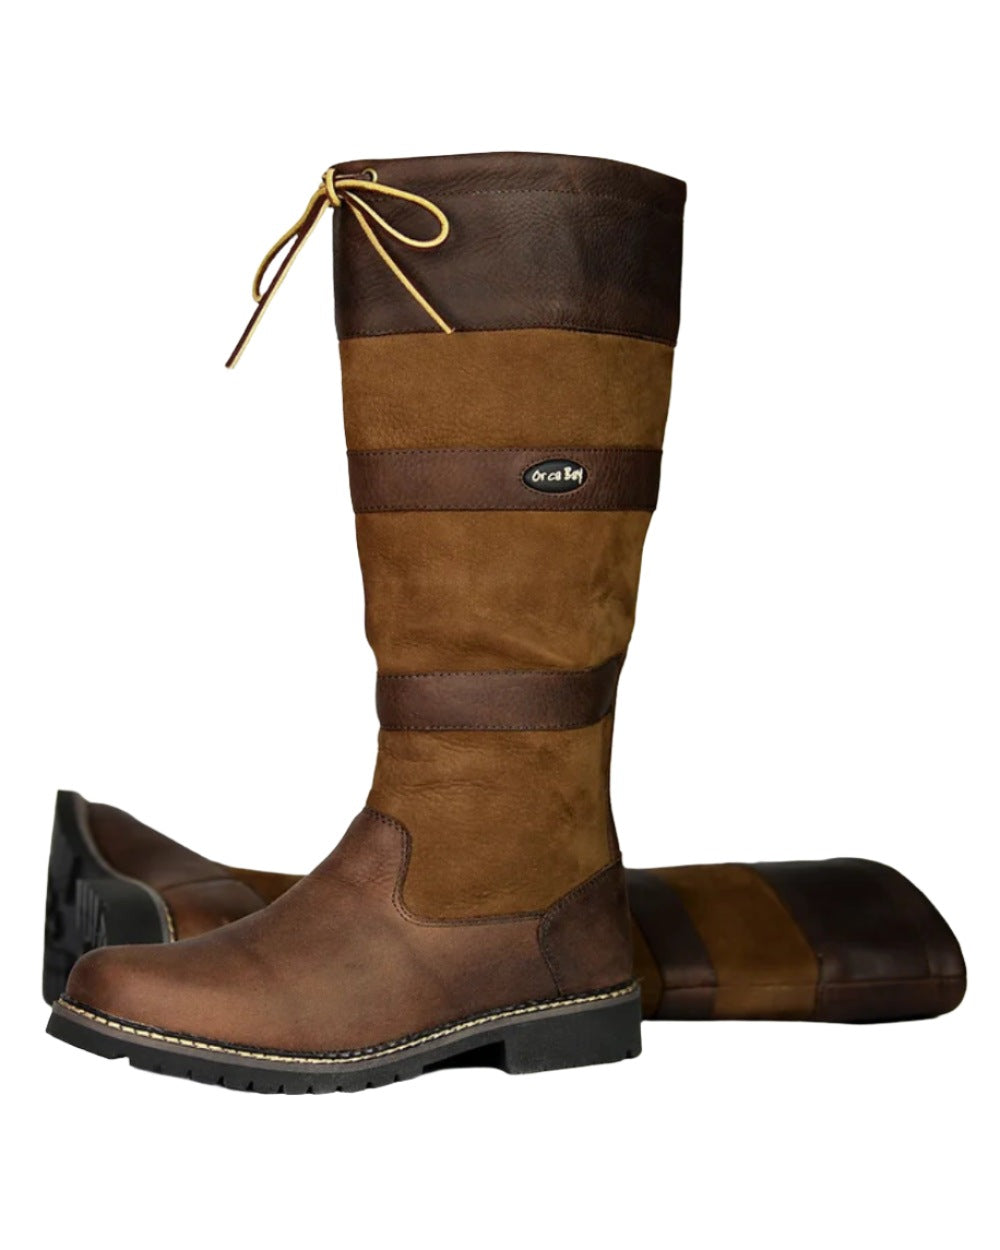 Brown Coloured Orca Bay Orkney S-Fit Country Boots On A White Background